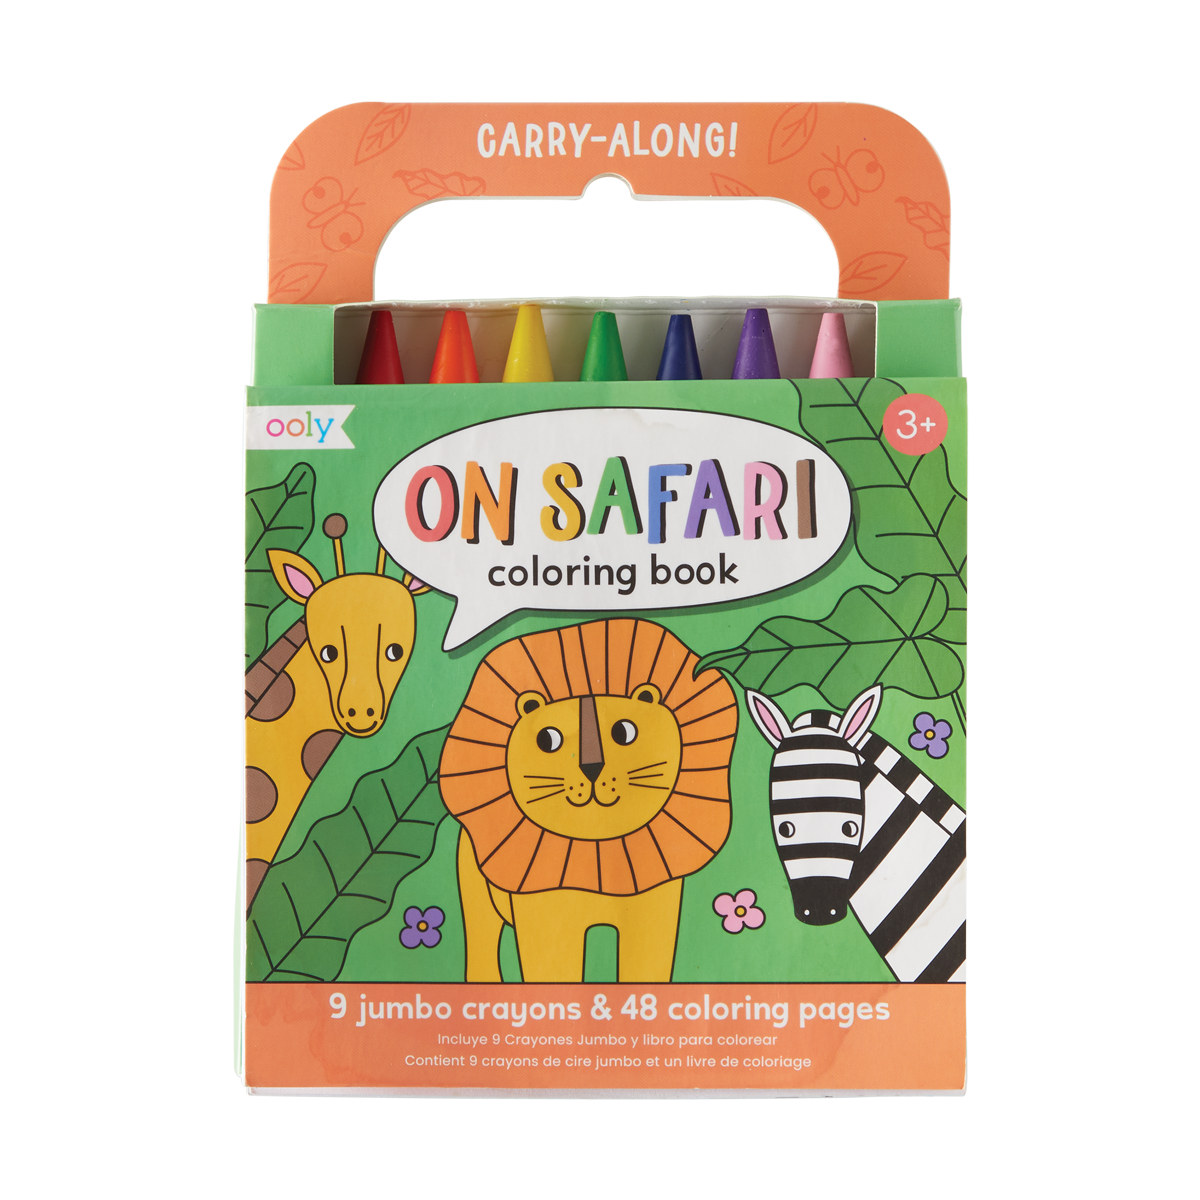 OOLY view of Carry Along Coloring Book Set - On Safari in packaging